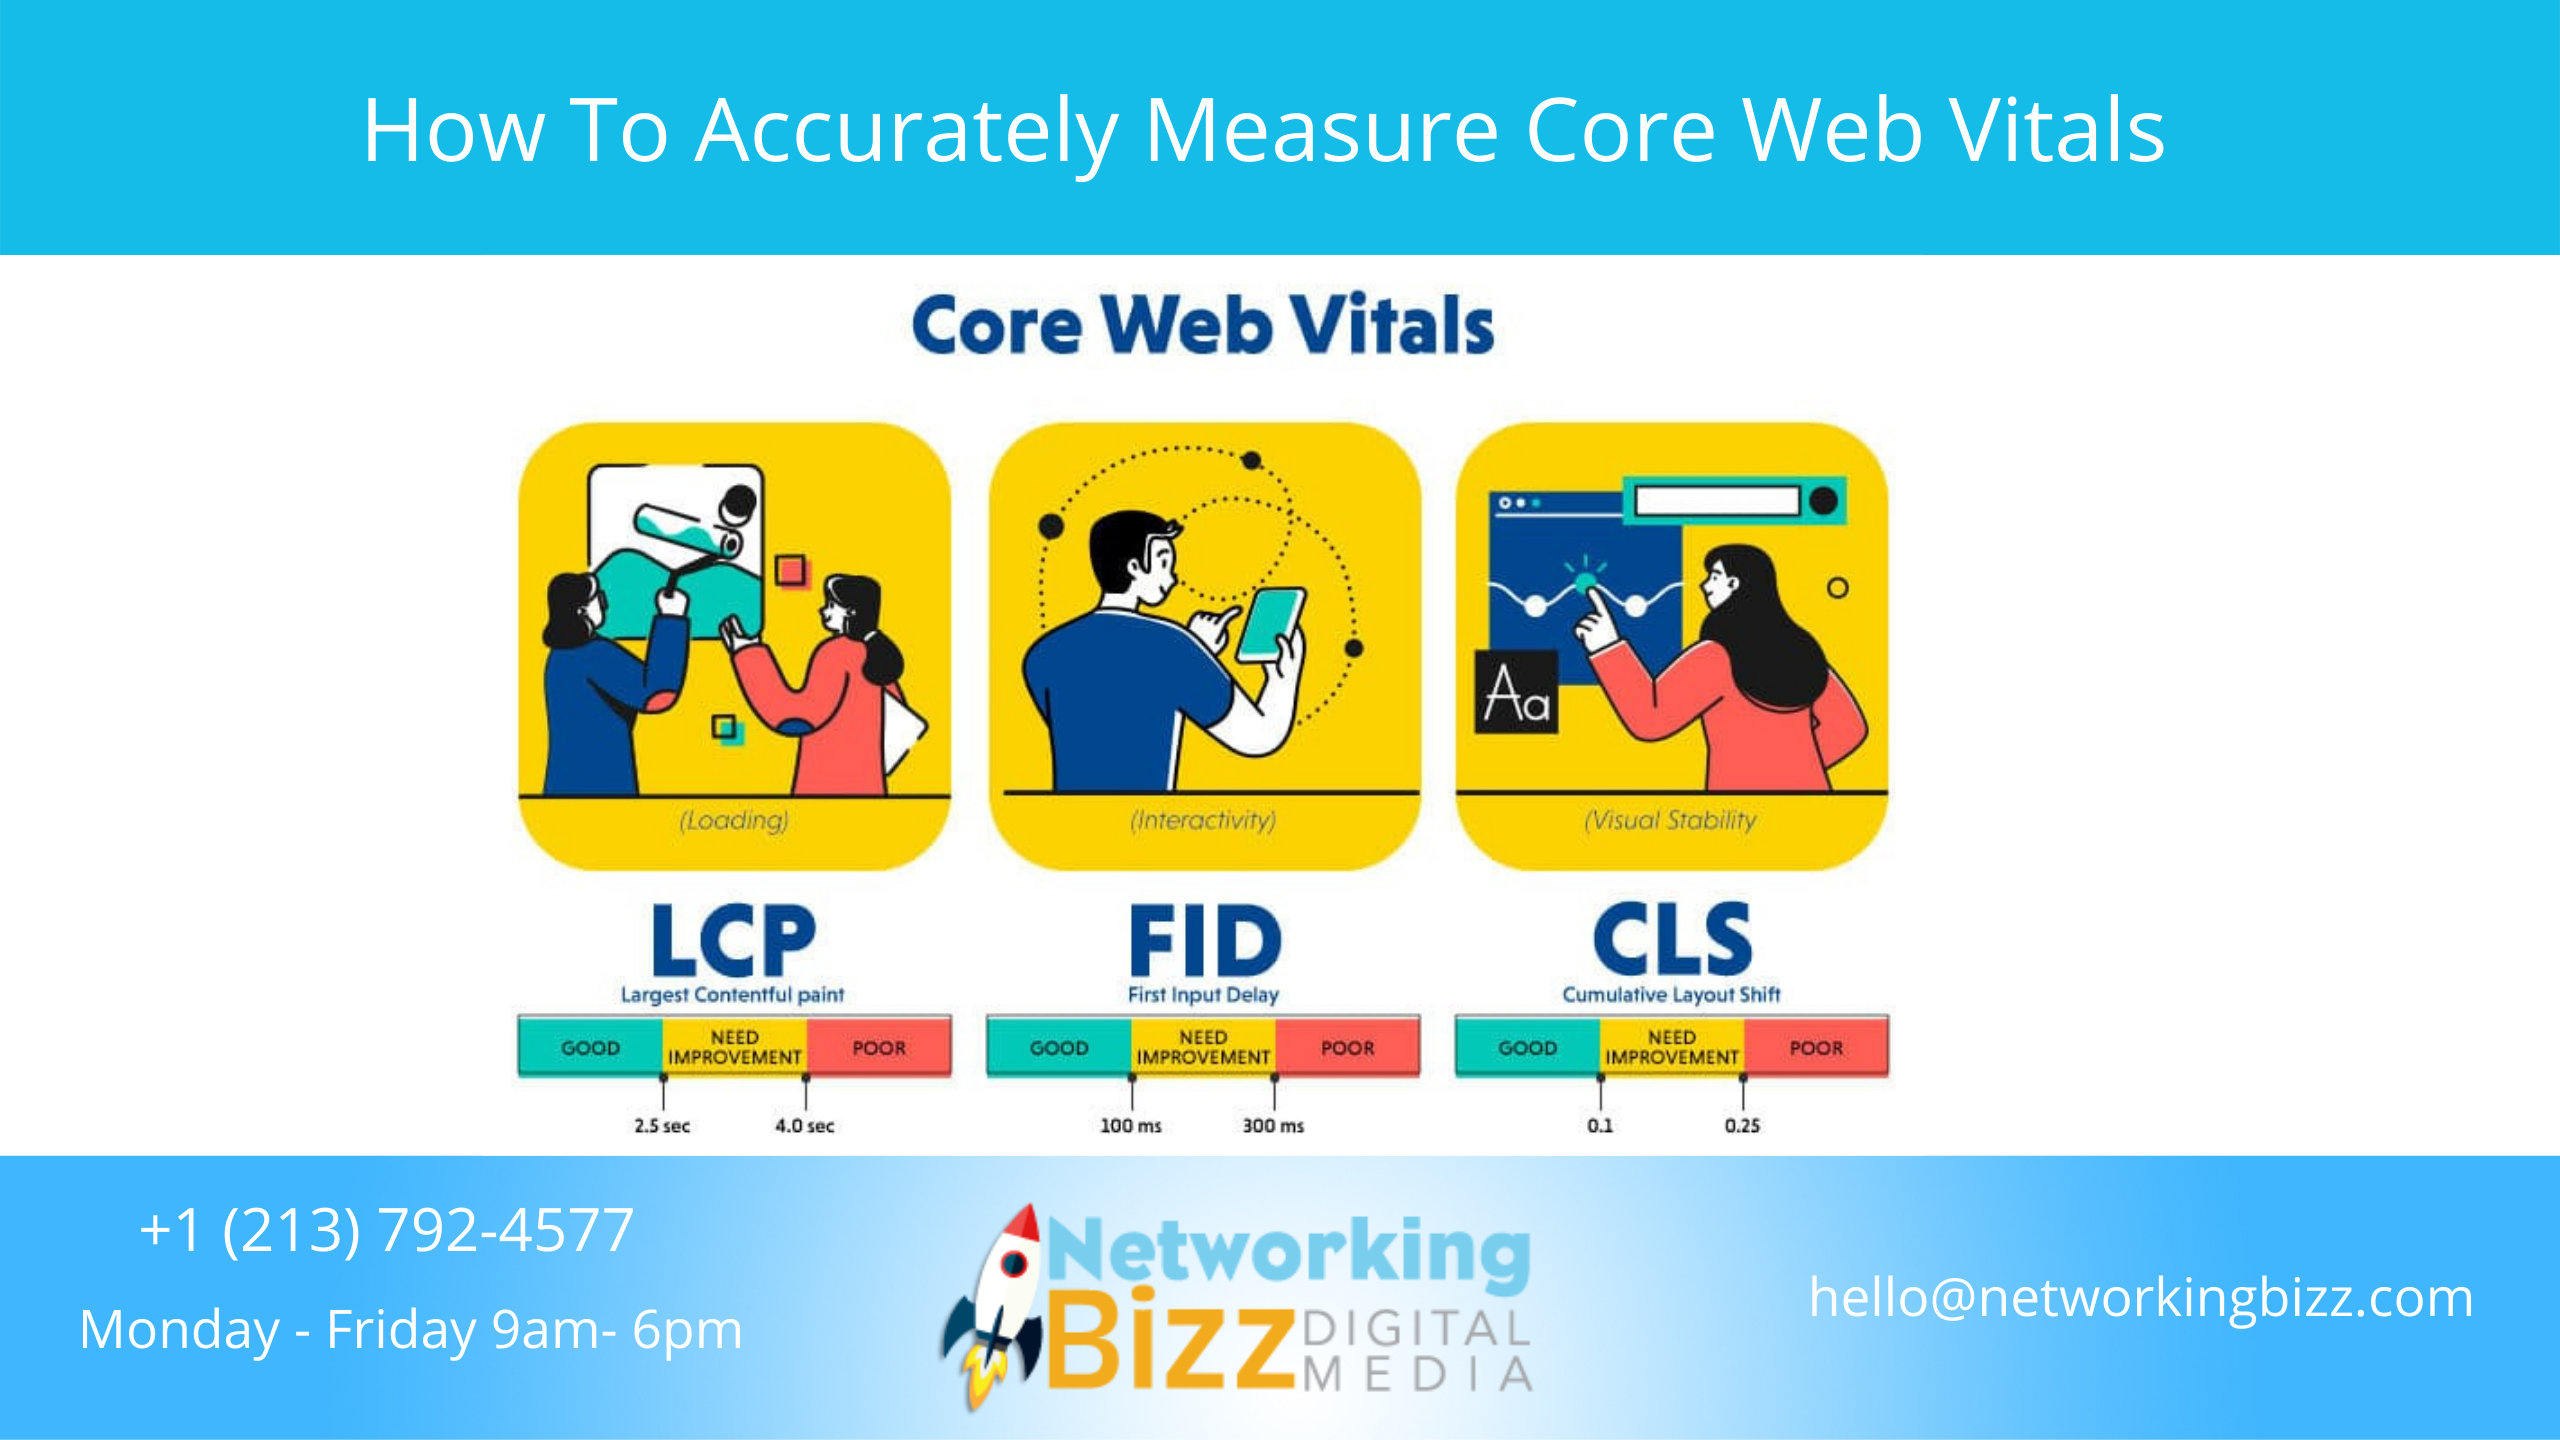 How To Accurately Measure Core Web Vitals